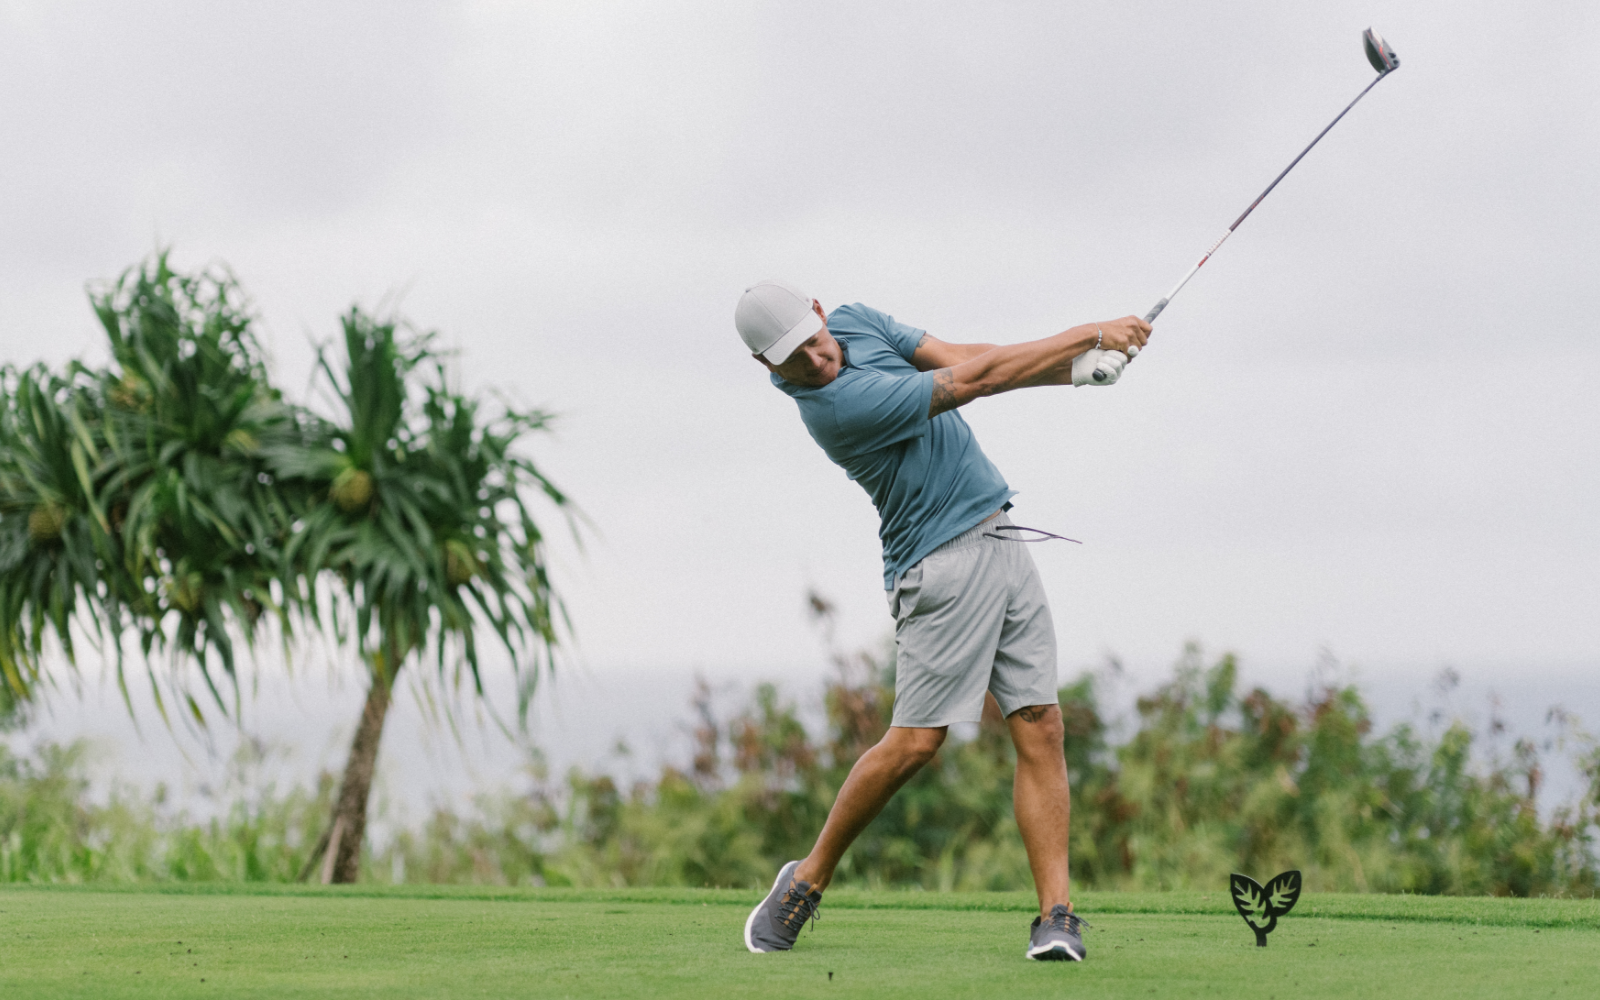 The Most Comfortable Shoes for Golf - OluKai Kā'anapali